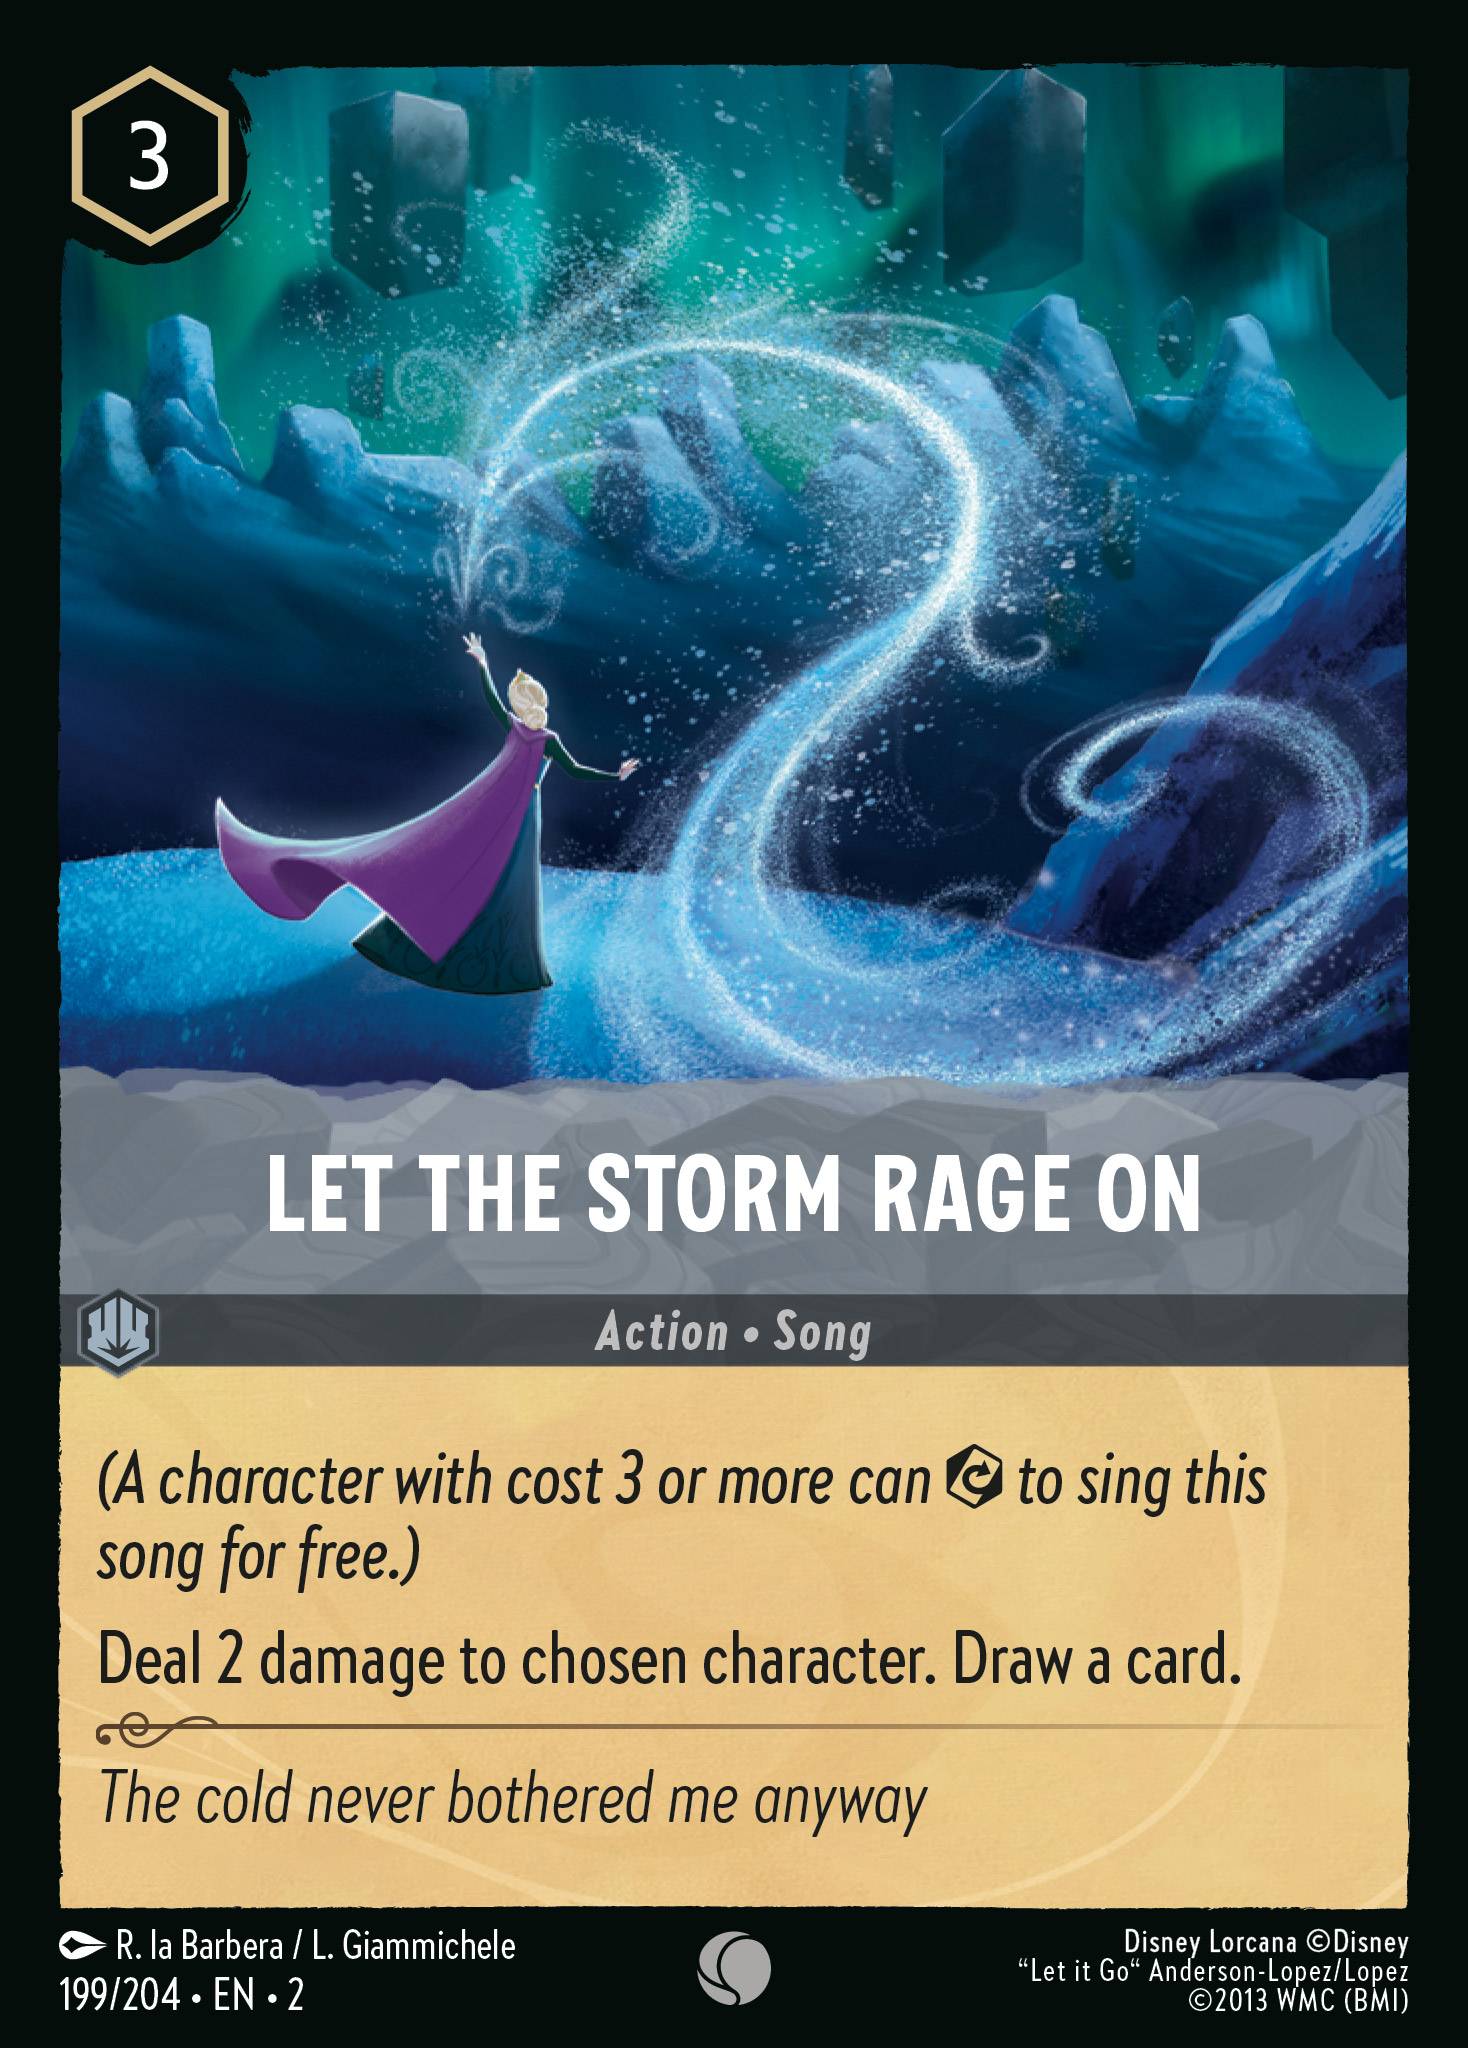 Let the Storm Rage On